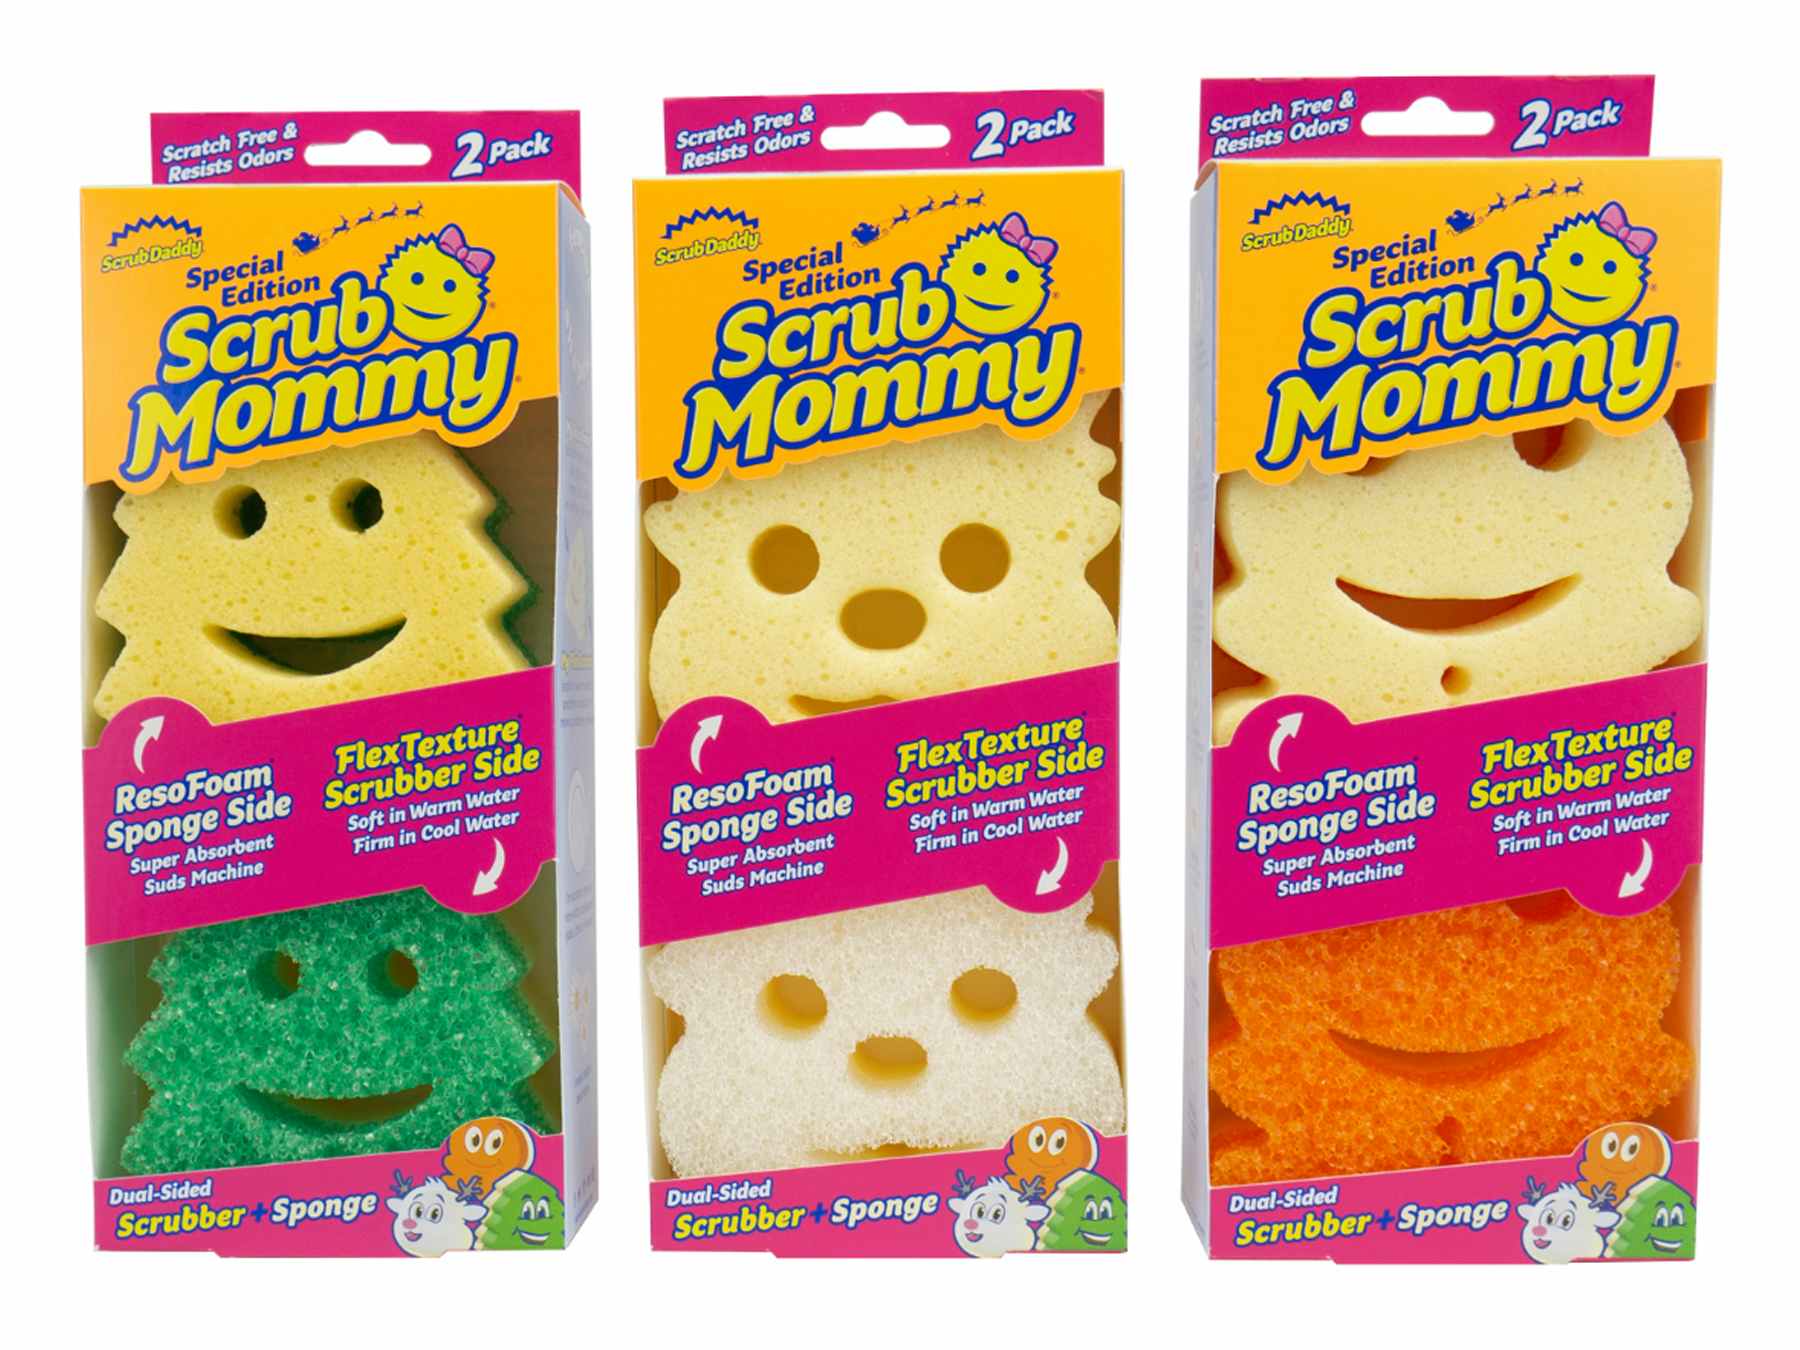 Holiday Scrub Daddy Shapes Are $4 Each, Perfect for White Elephant